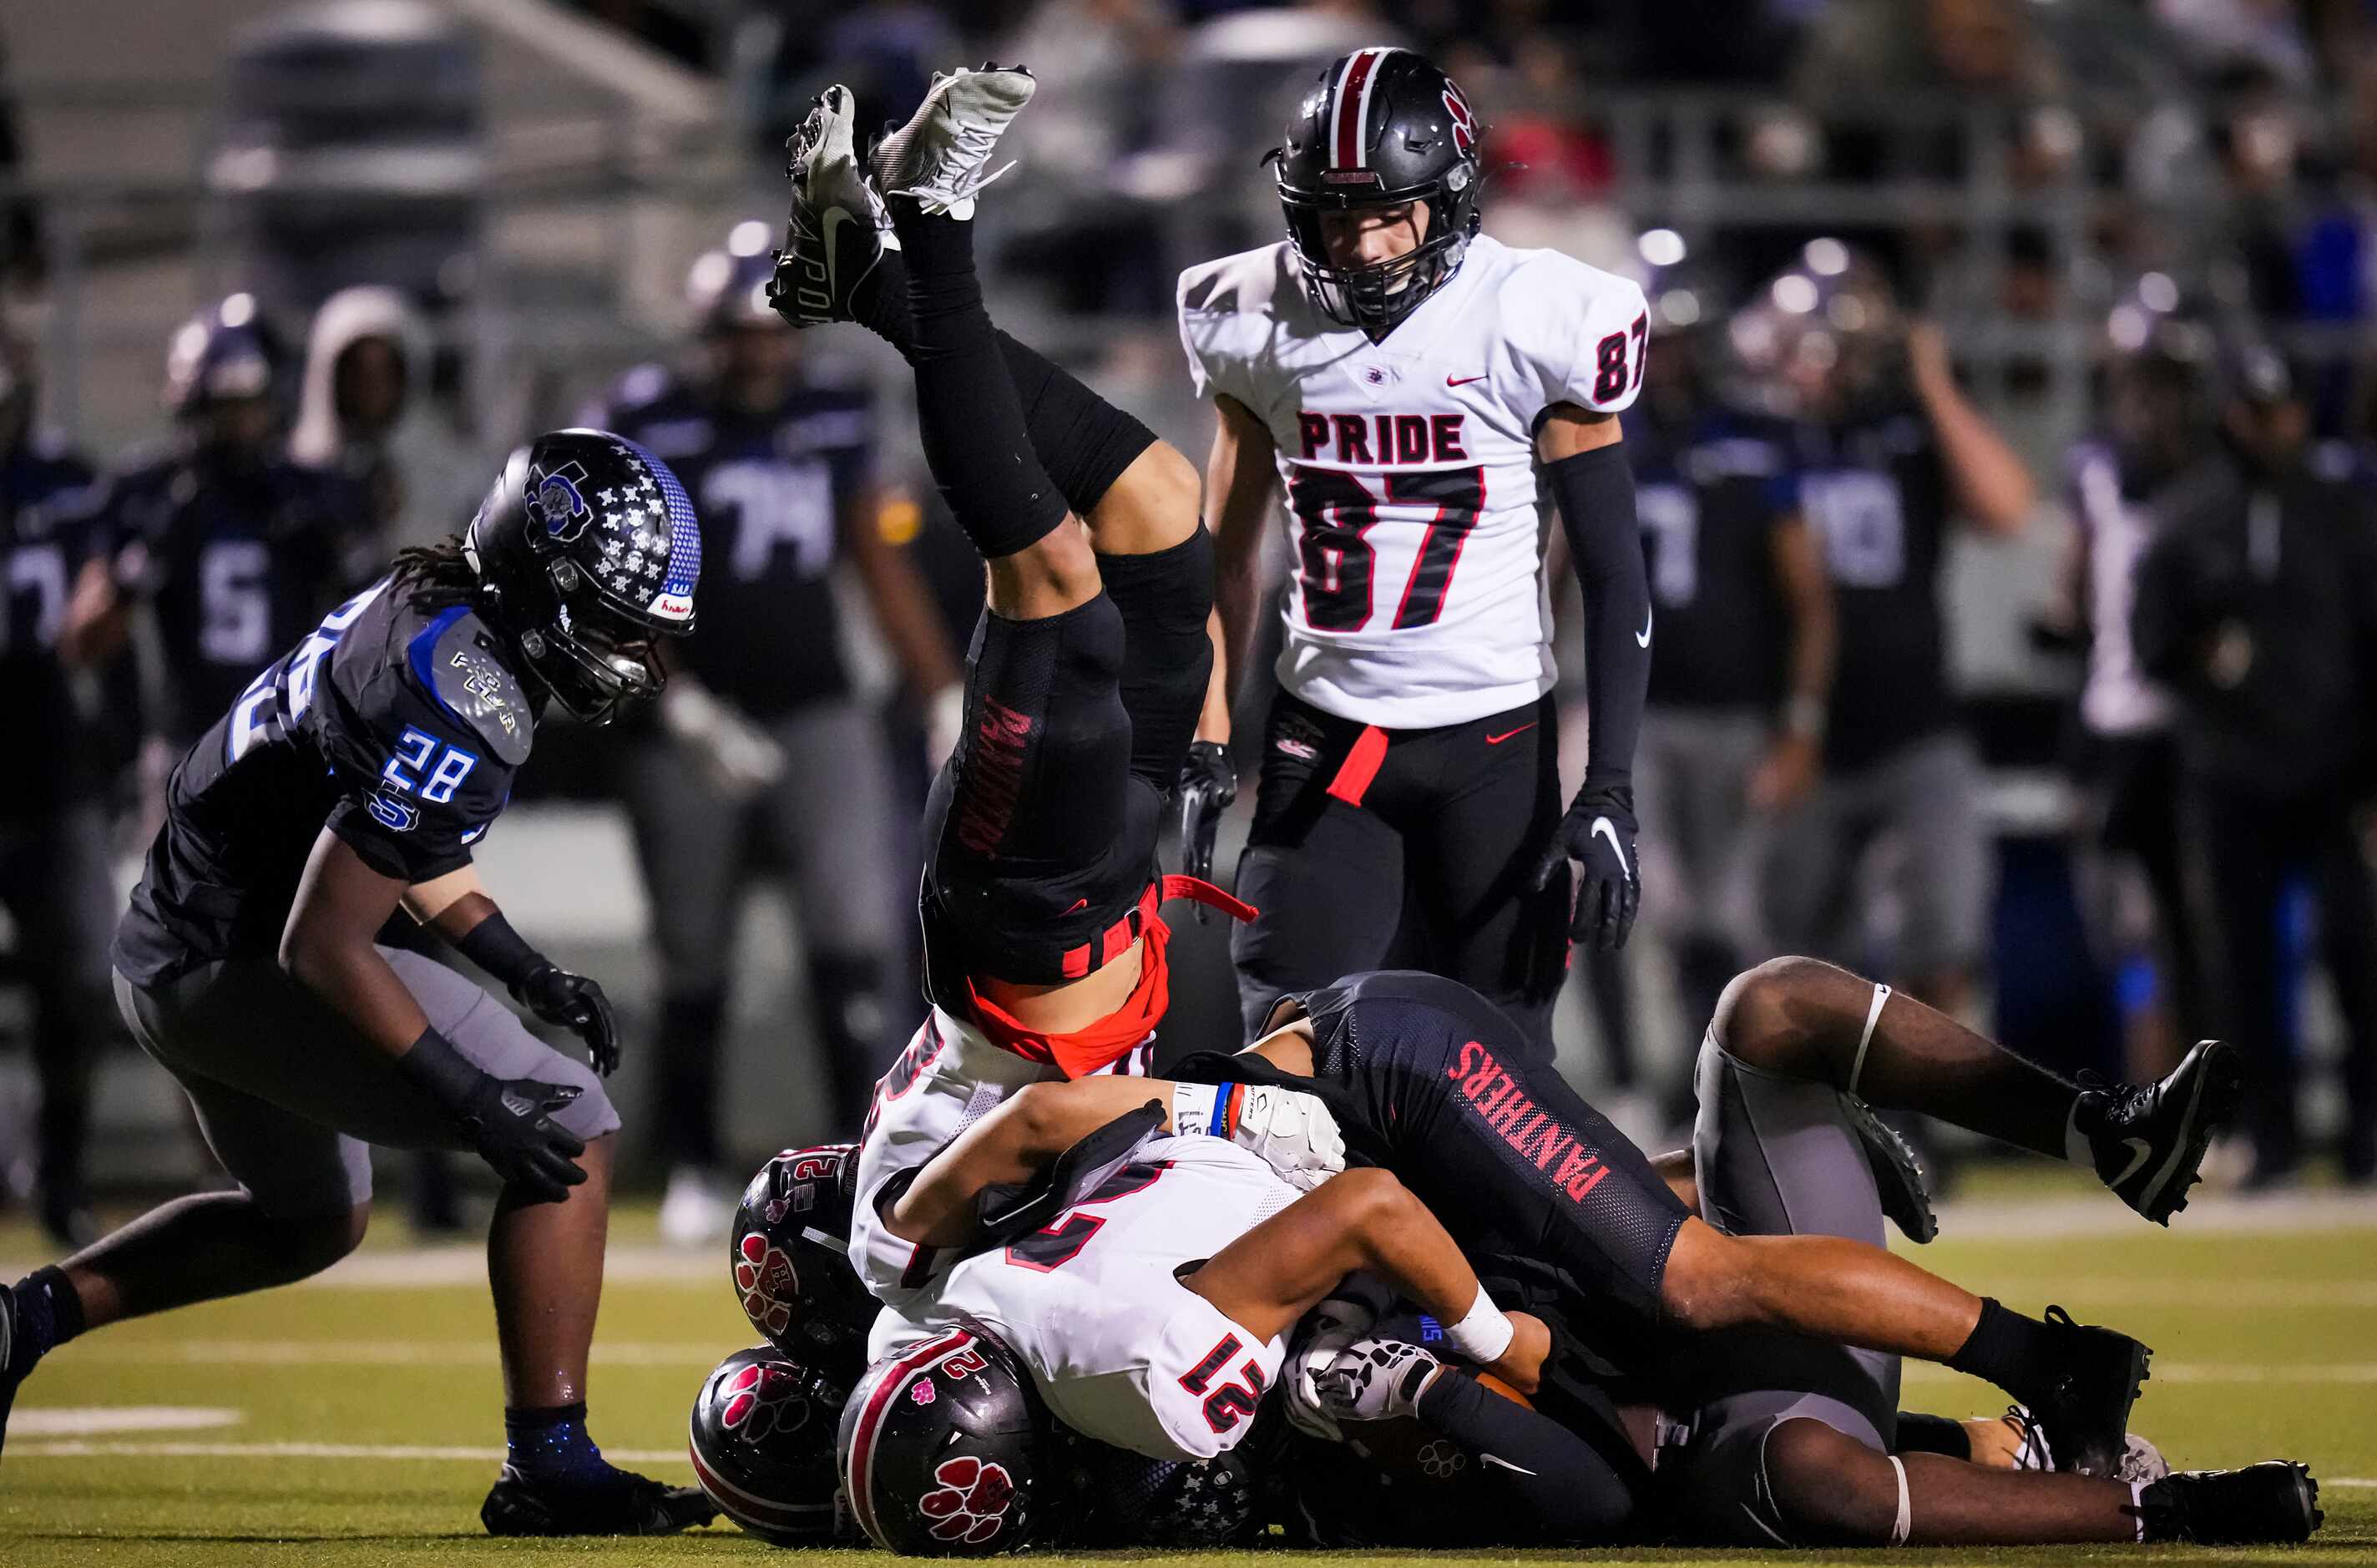 Colleyville Heritage running back Riley Wormley (27) tumbles over the pile as linebacker...